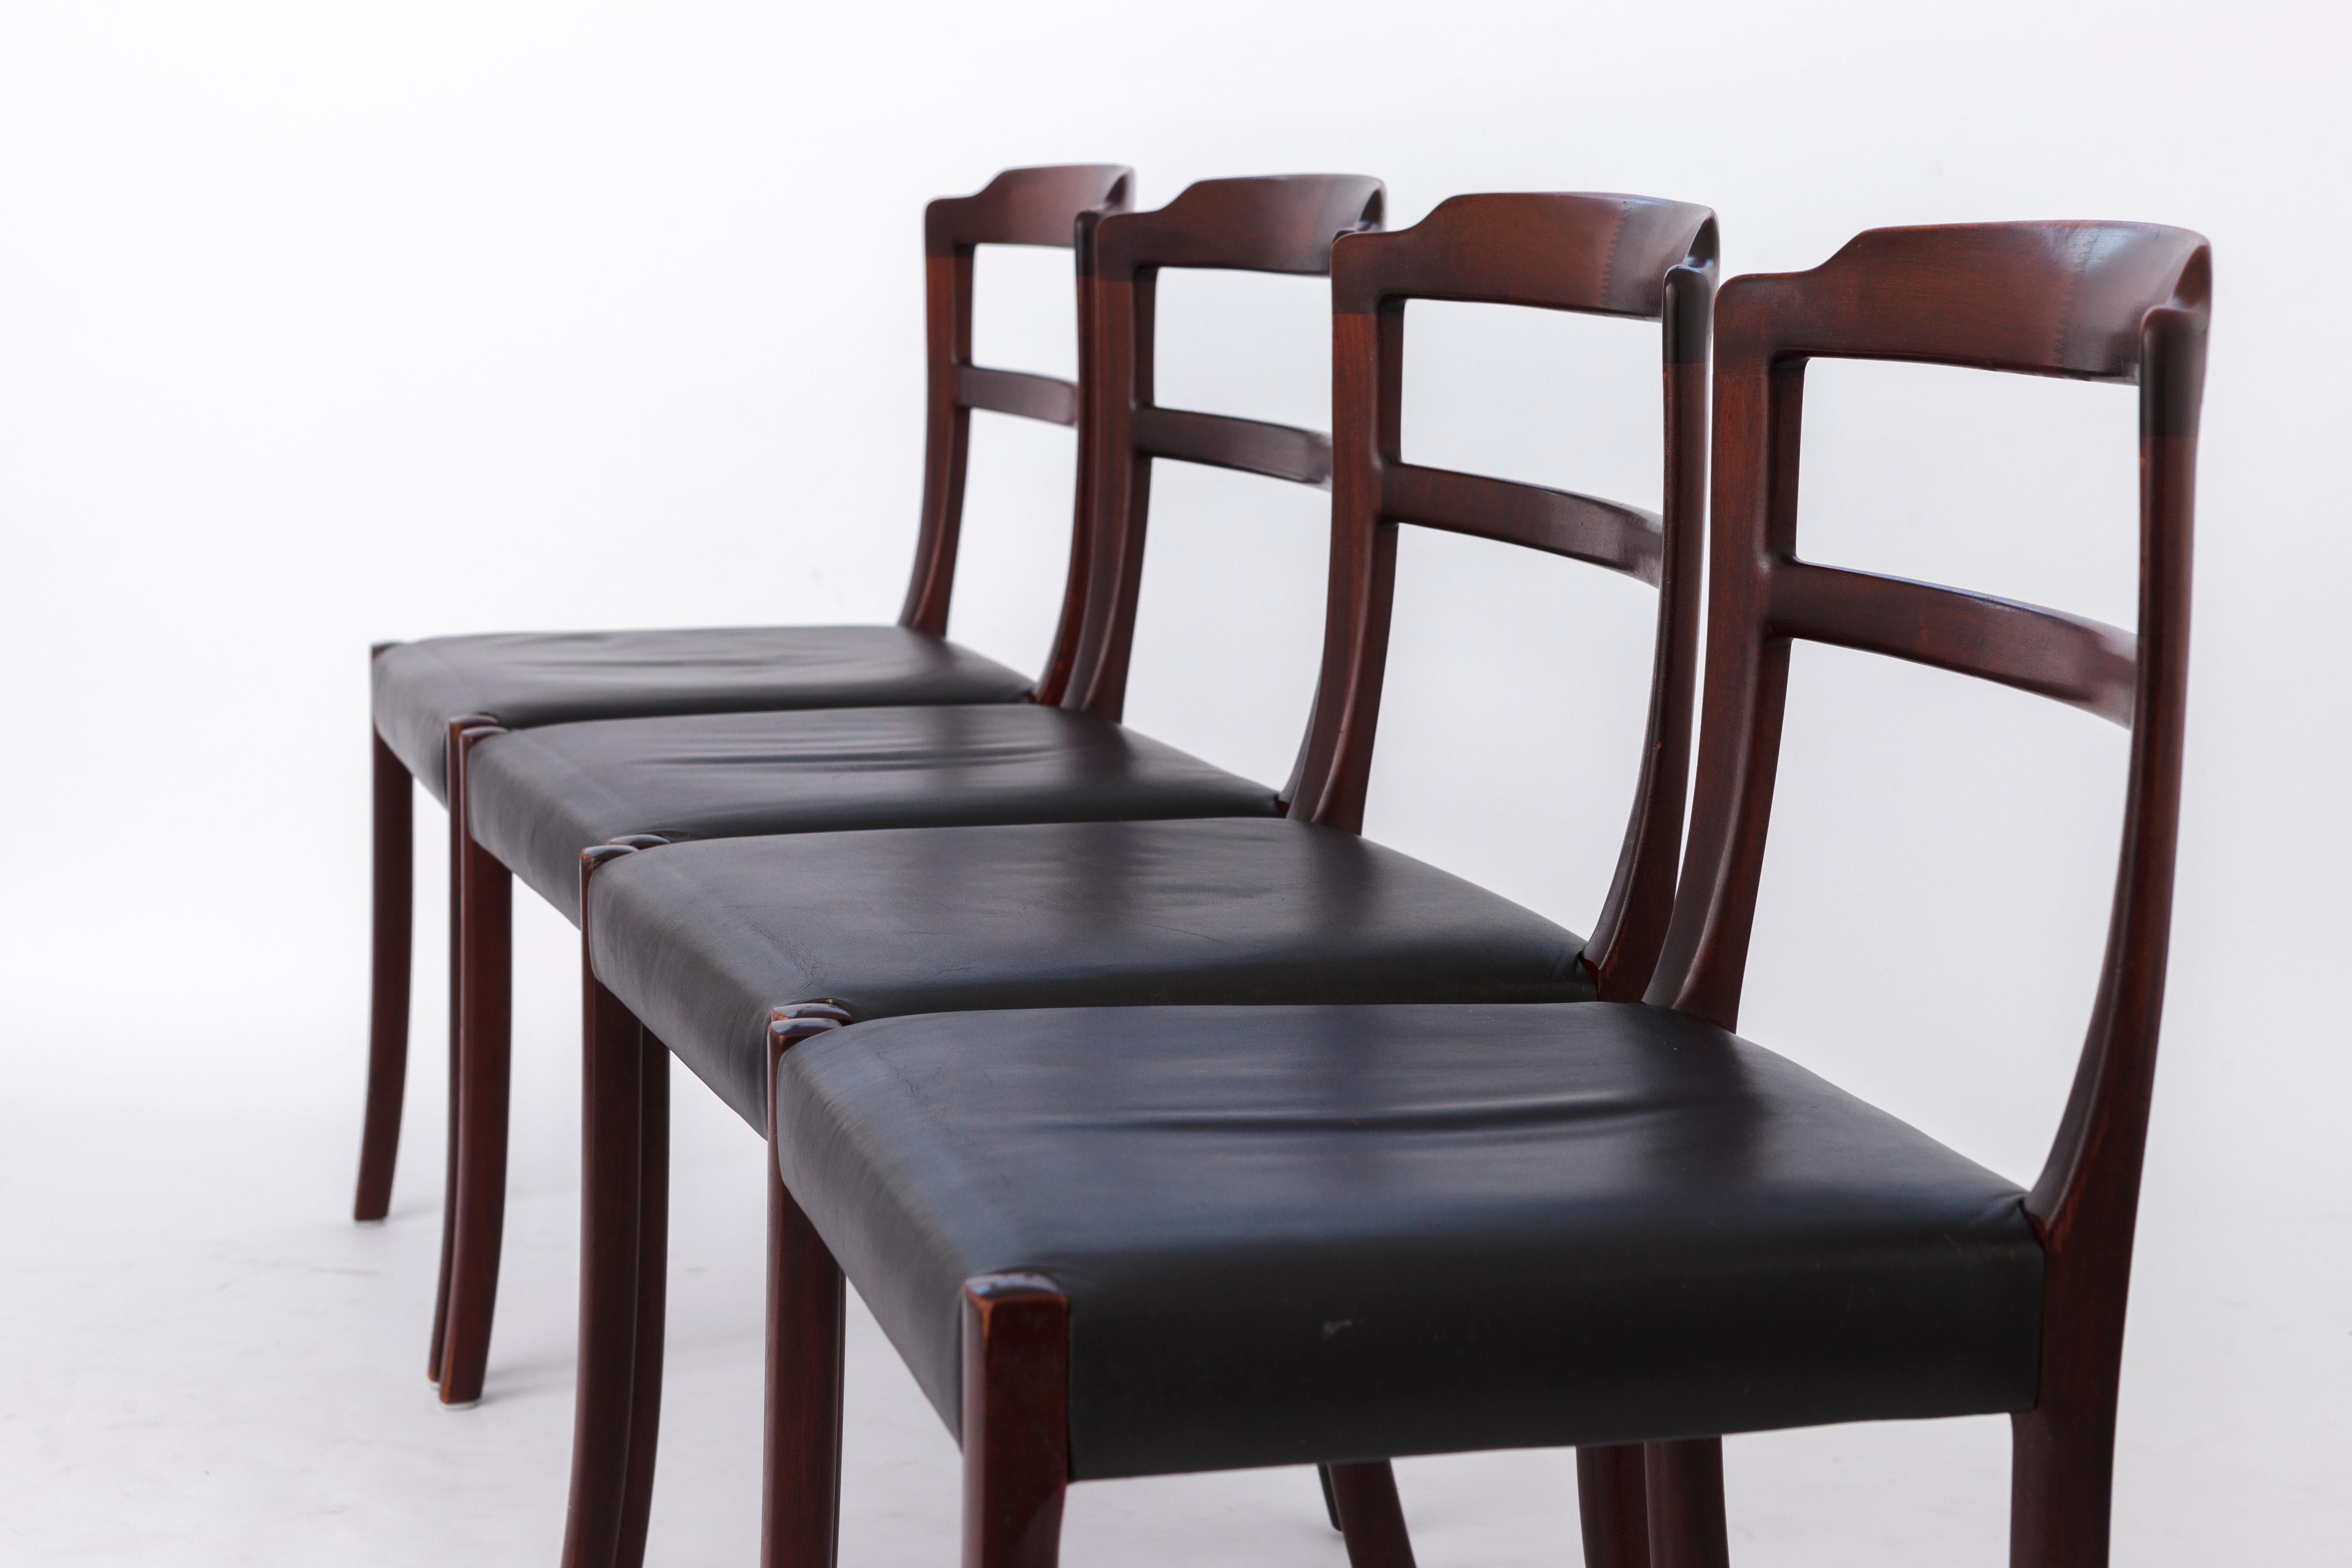 Set of 4 dining chairs by Ole Wanscher, Denmark.
Production period: 1960s. 
Displayed price is for 4 chairs. 

Good vintage condition. 
Sturdy rosewood frames. Refurbished and oiled. 
Original black leather seat cover. 